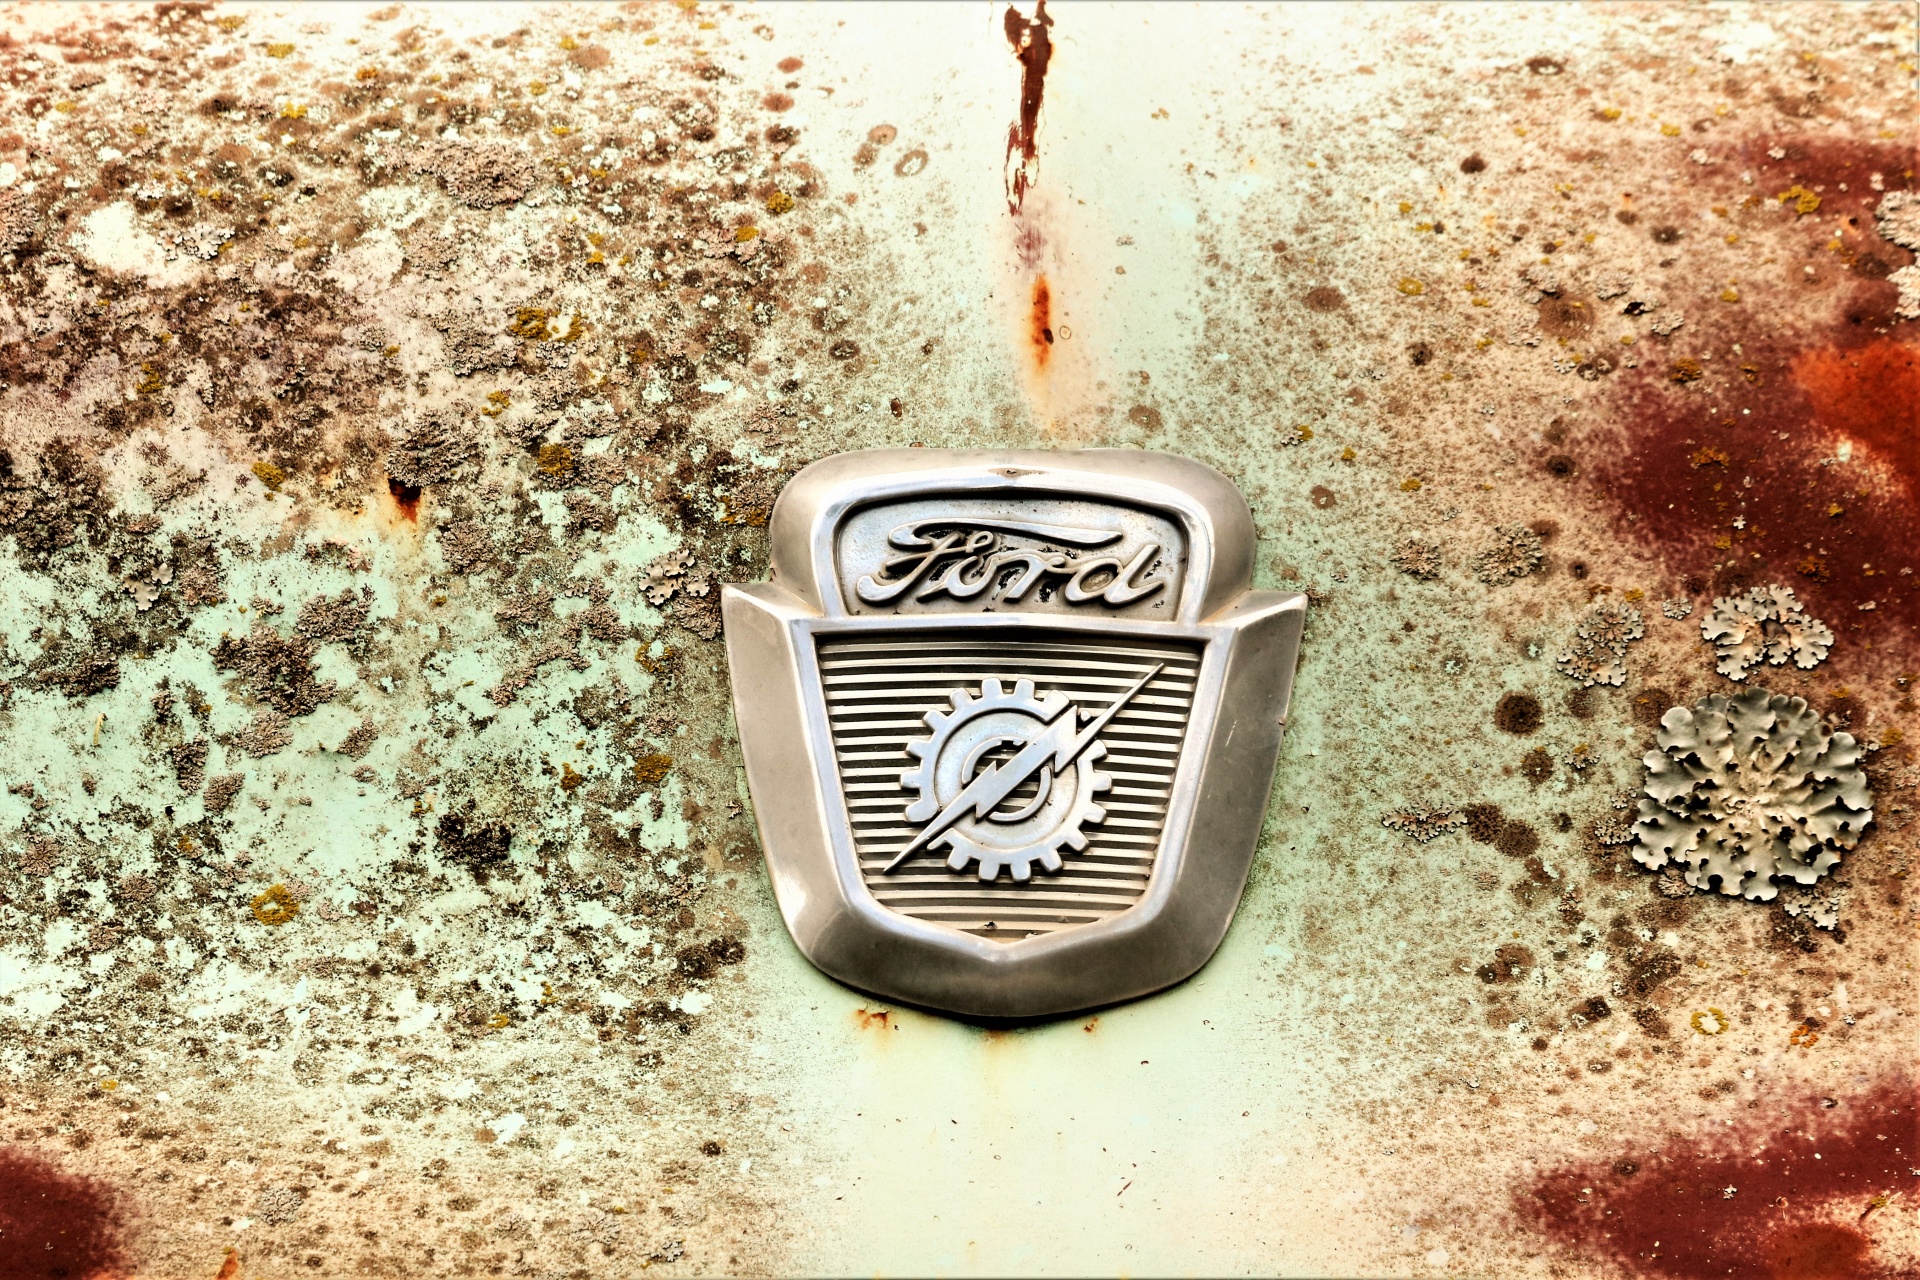 1956 Ford Truck Badge